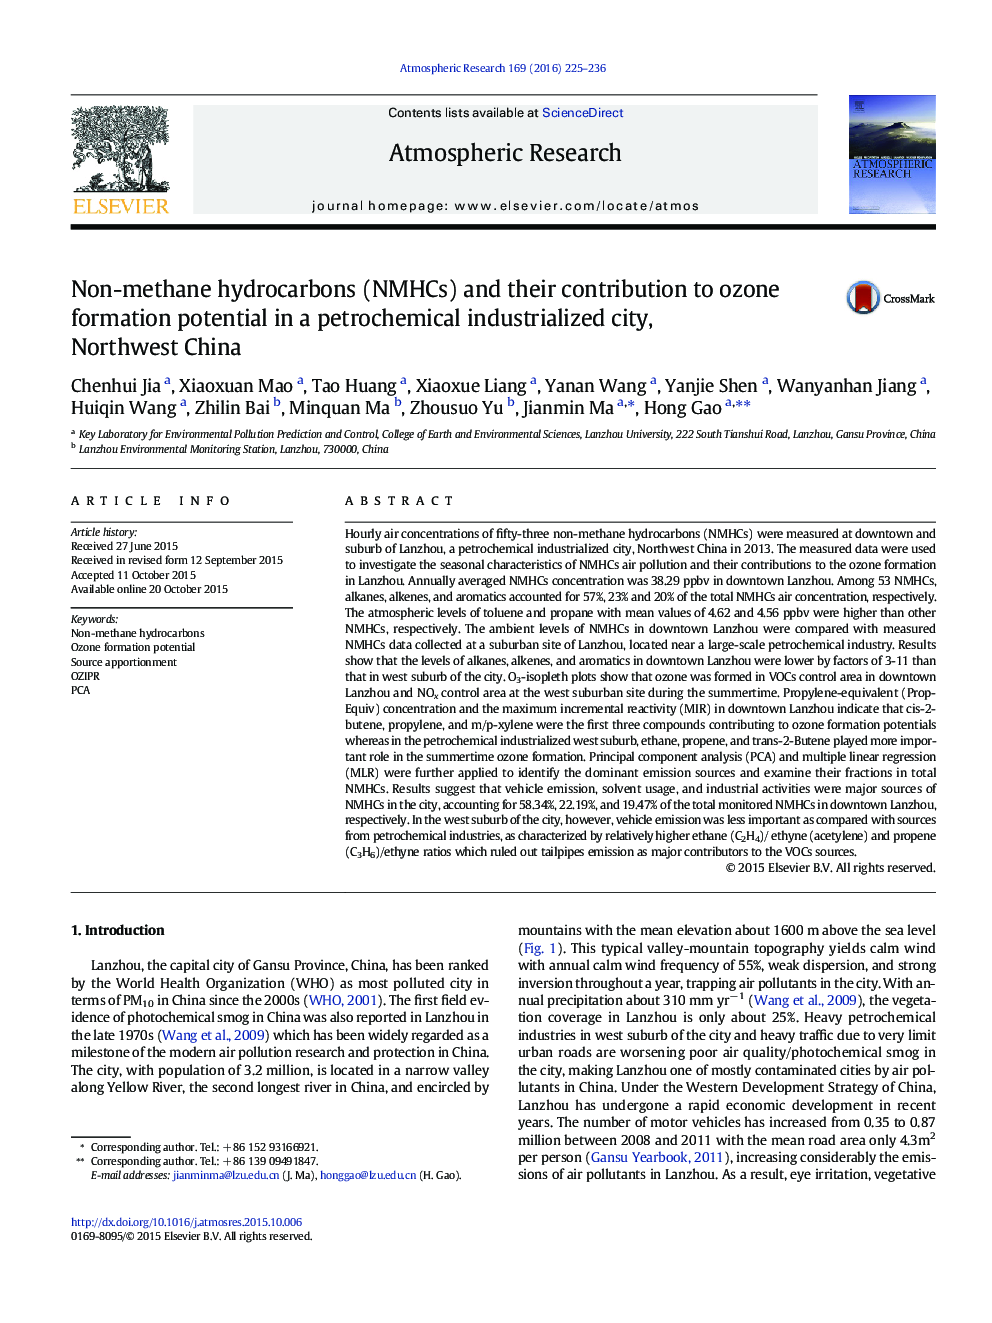 Non-methane hydrocarbons (NMHCs) and their contribution to ozone formation potential in a petrochemical industrialized city, Northwest China